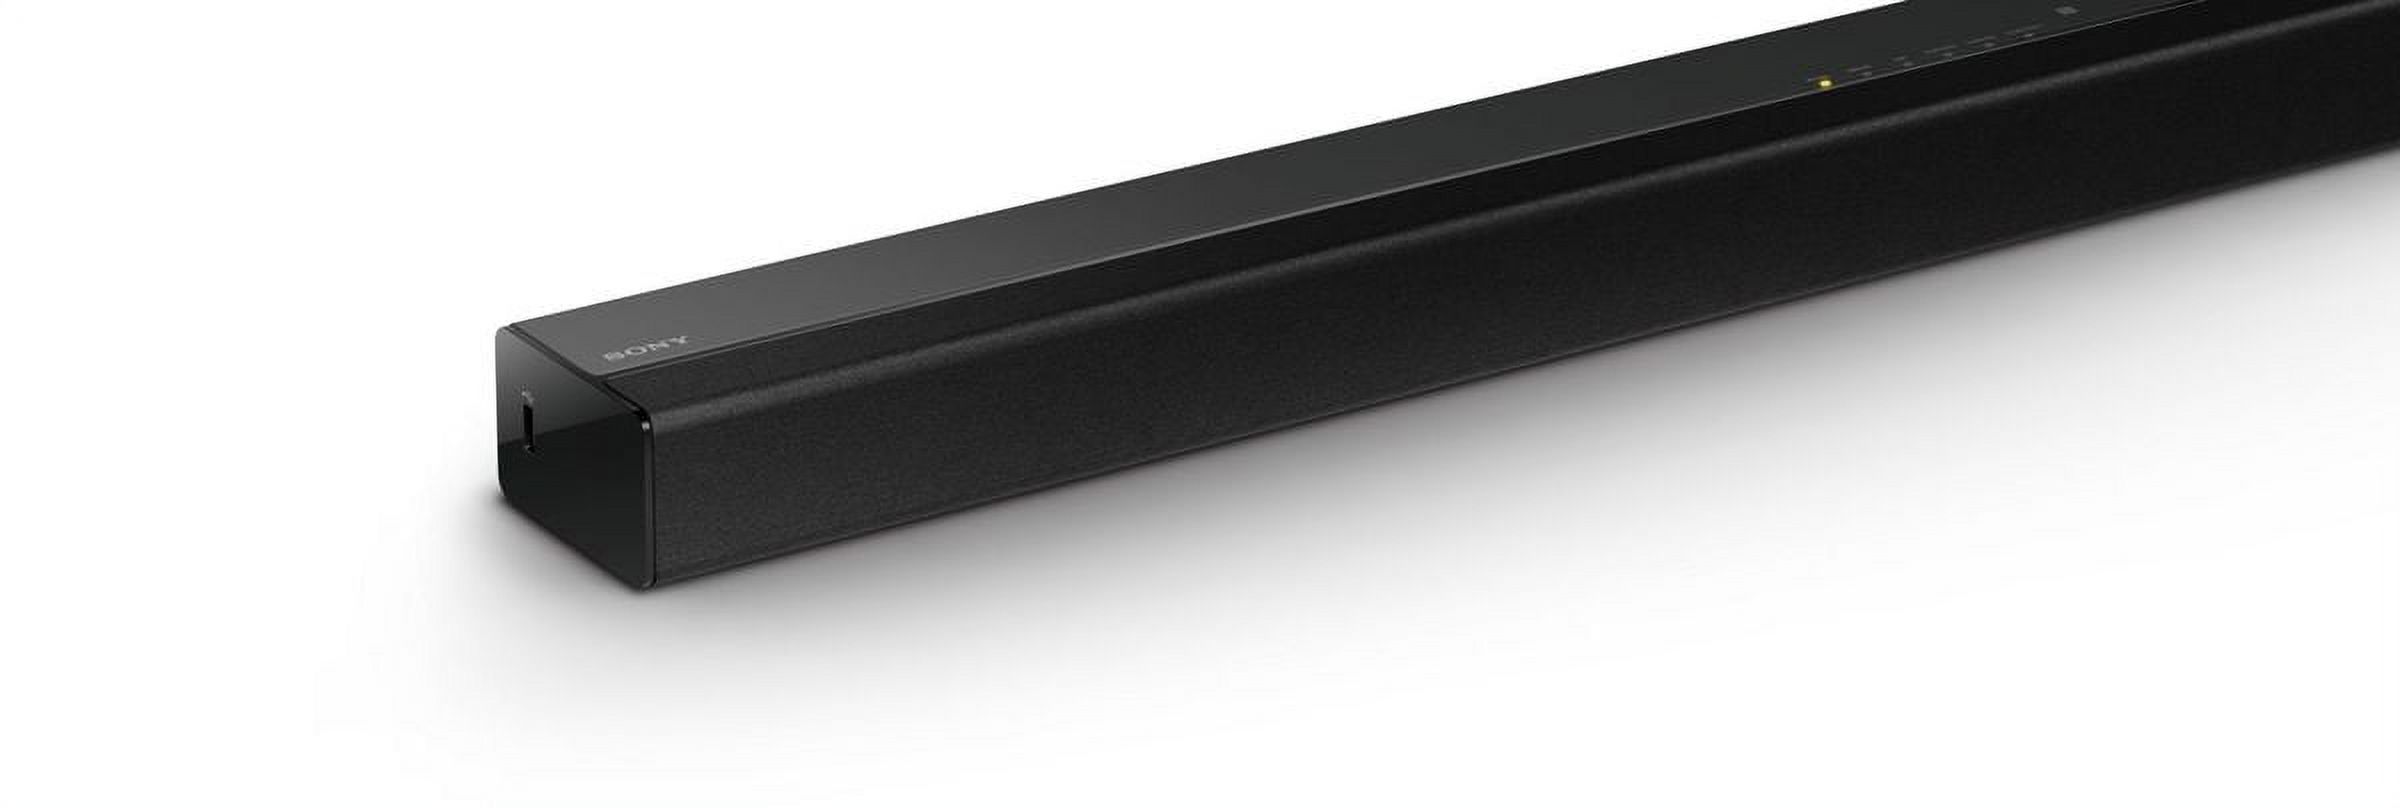 Sony HT-CT80 2.1 80W Channel Soundbar with Wired Subwoofer - image 3 of 8